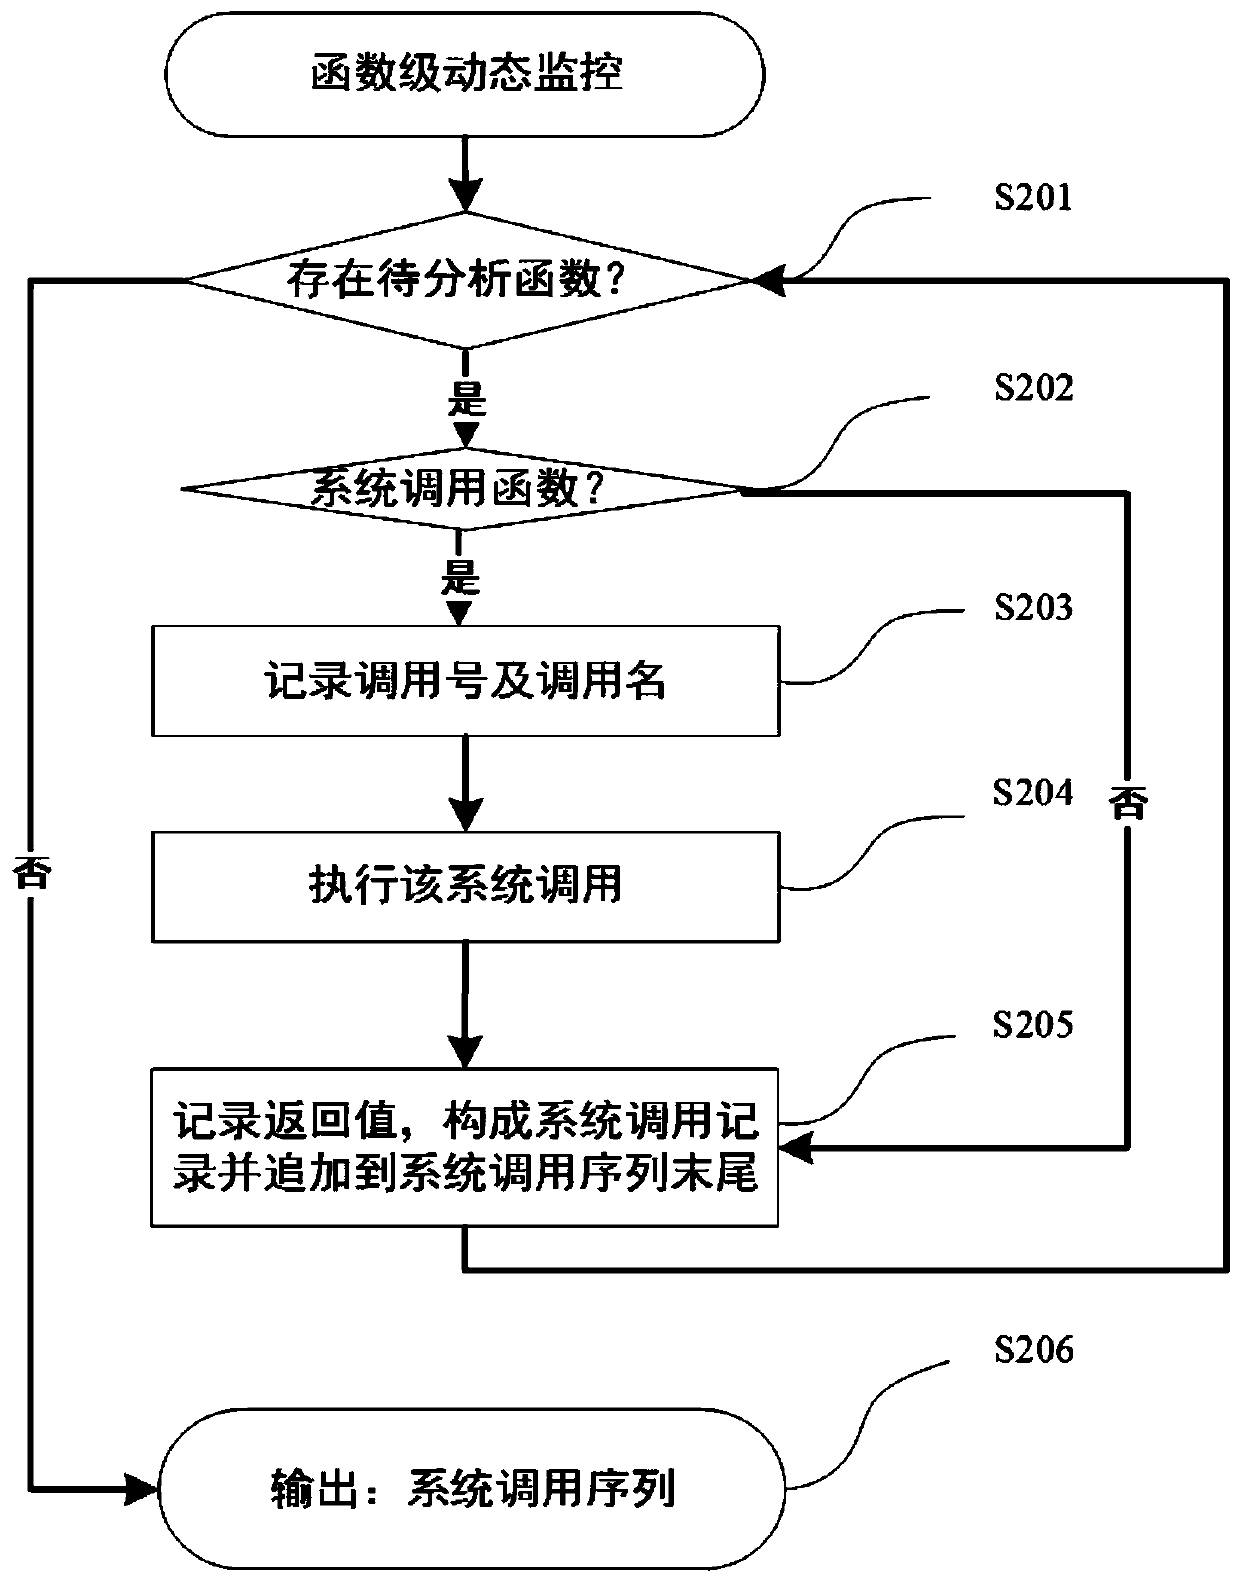 Multi-thread program plagiarism detection method based on frequent pattern mining